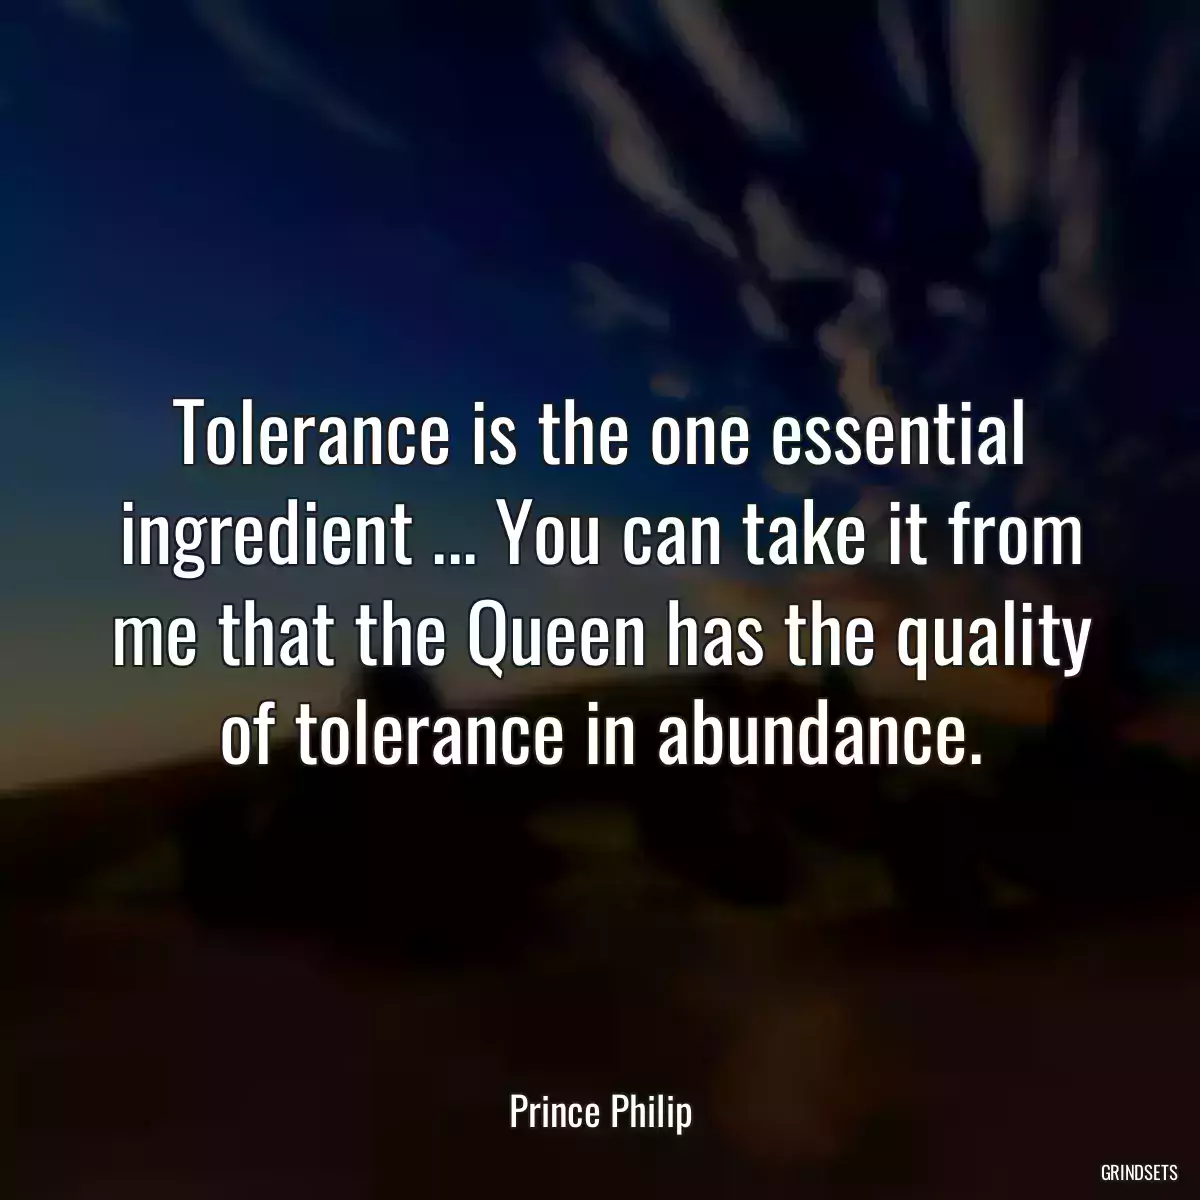 Tolerance is the one essential ingredient ... You can take it from me that the Queen has the quality of tolerance in abundance.